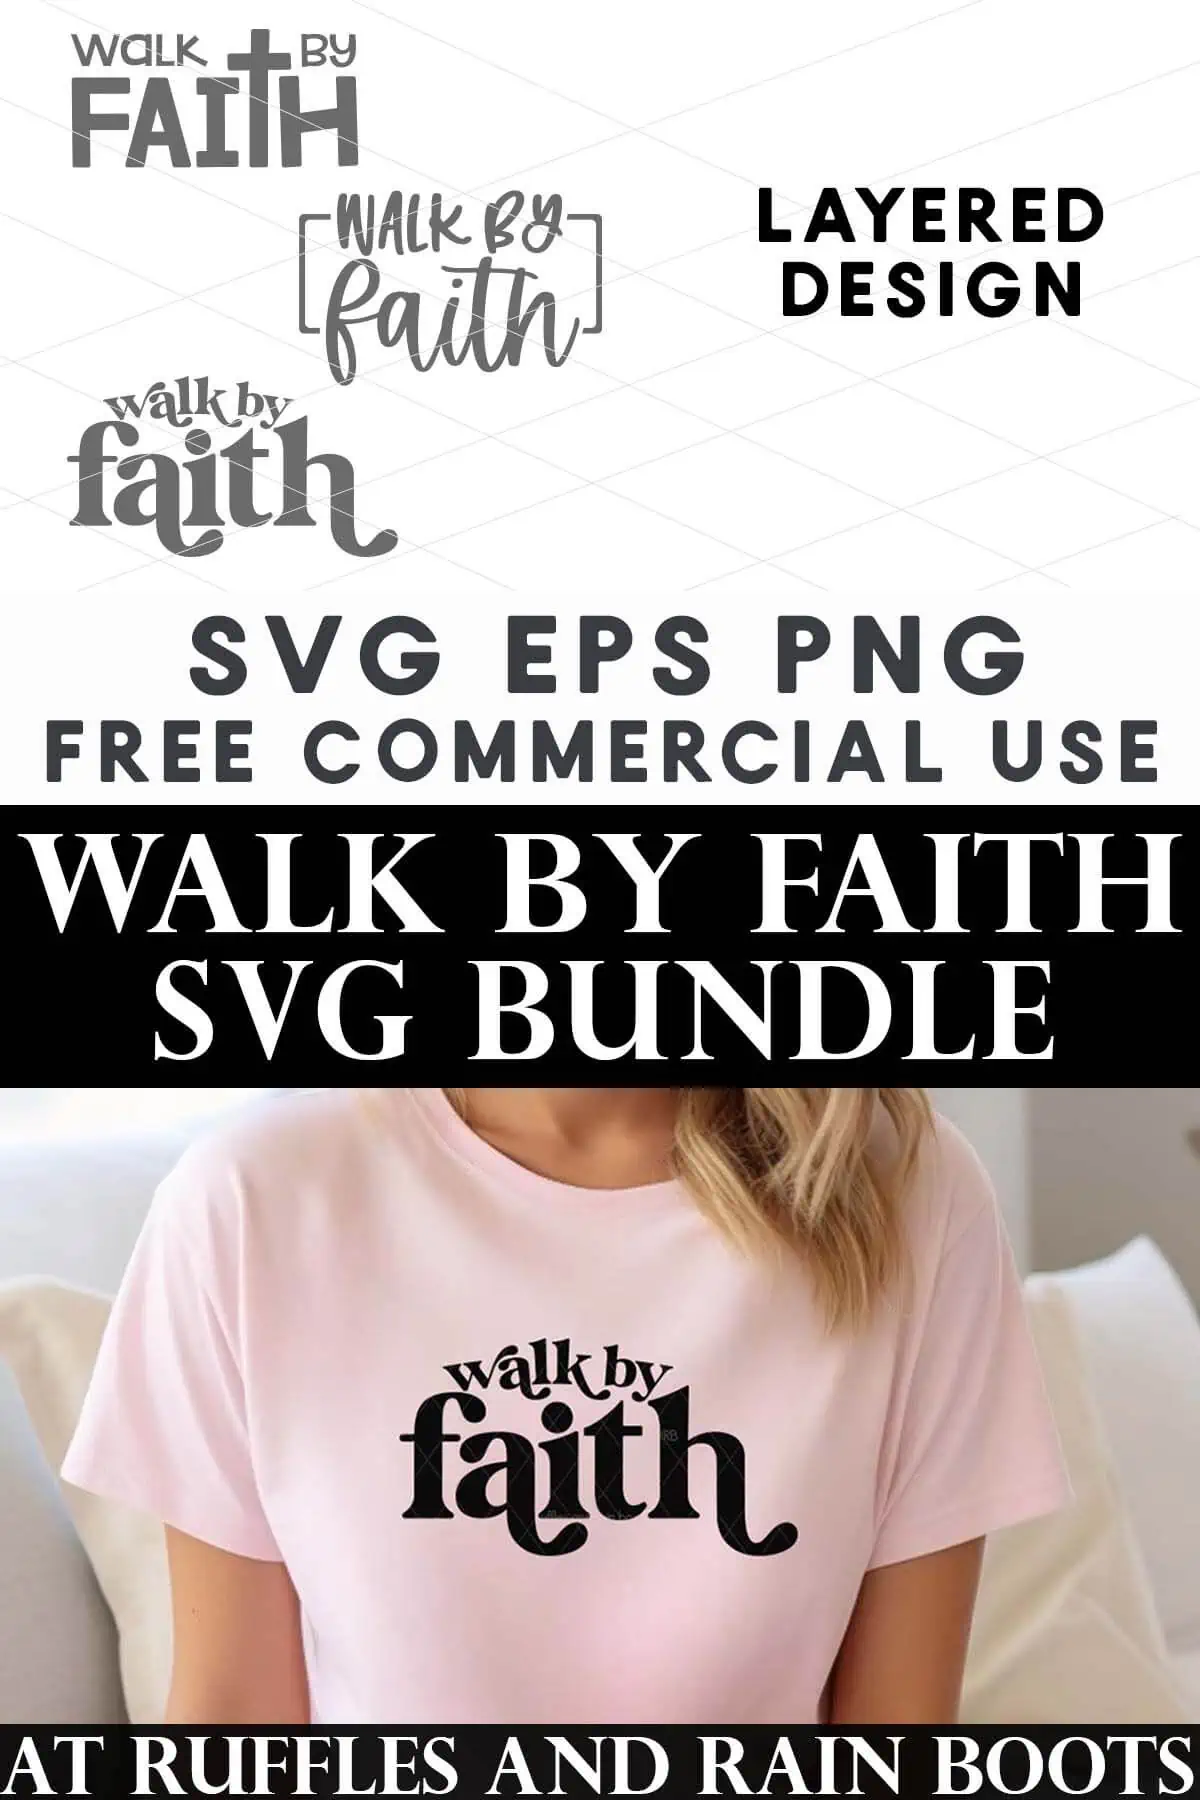 Vertical split image of walk by faith SVG bundle and woman on couch in pink shirt which reads walk by faith made with Cricut black heat transfer vinyl.